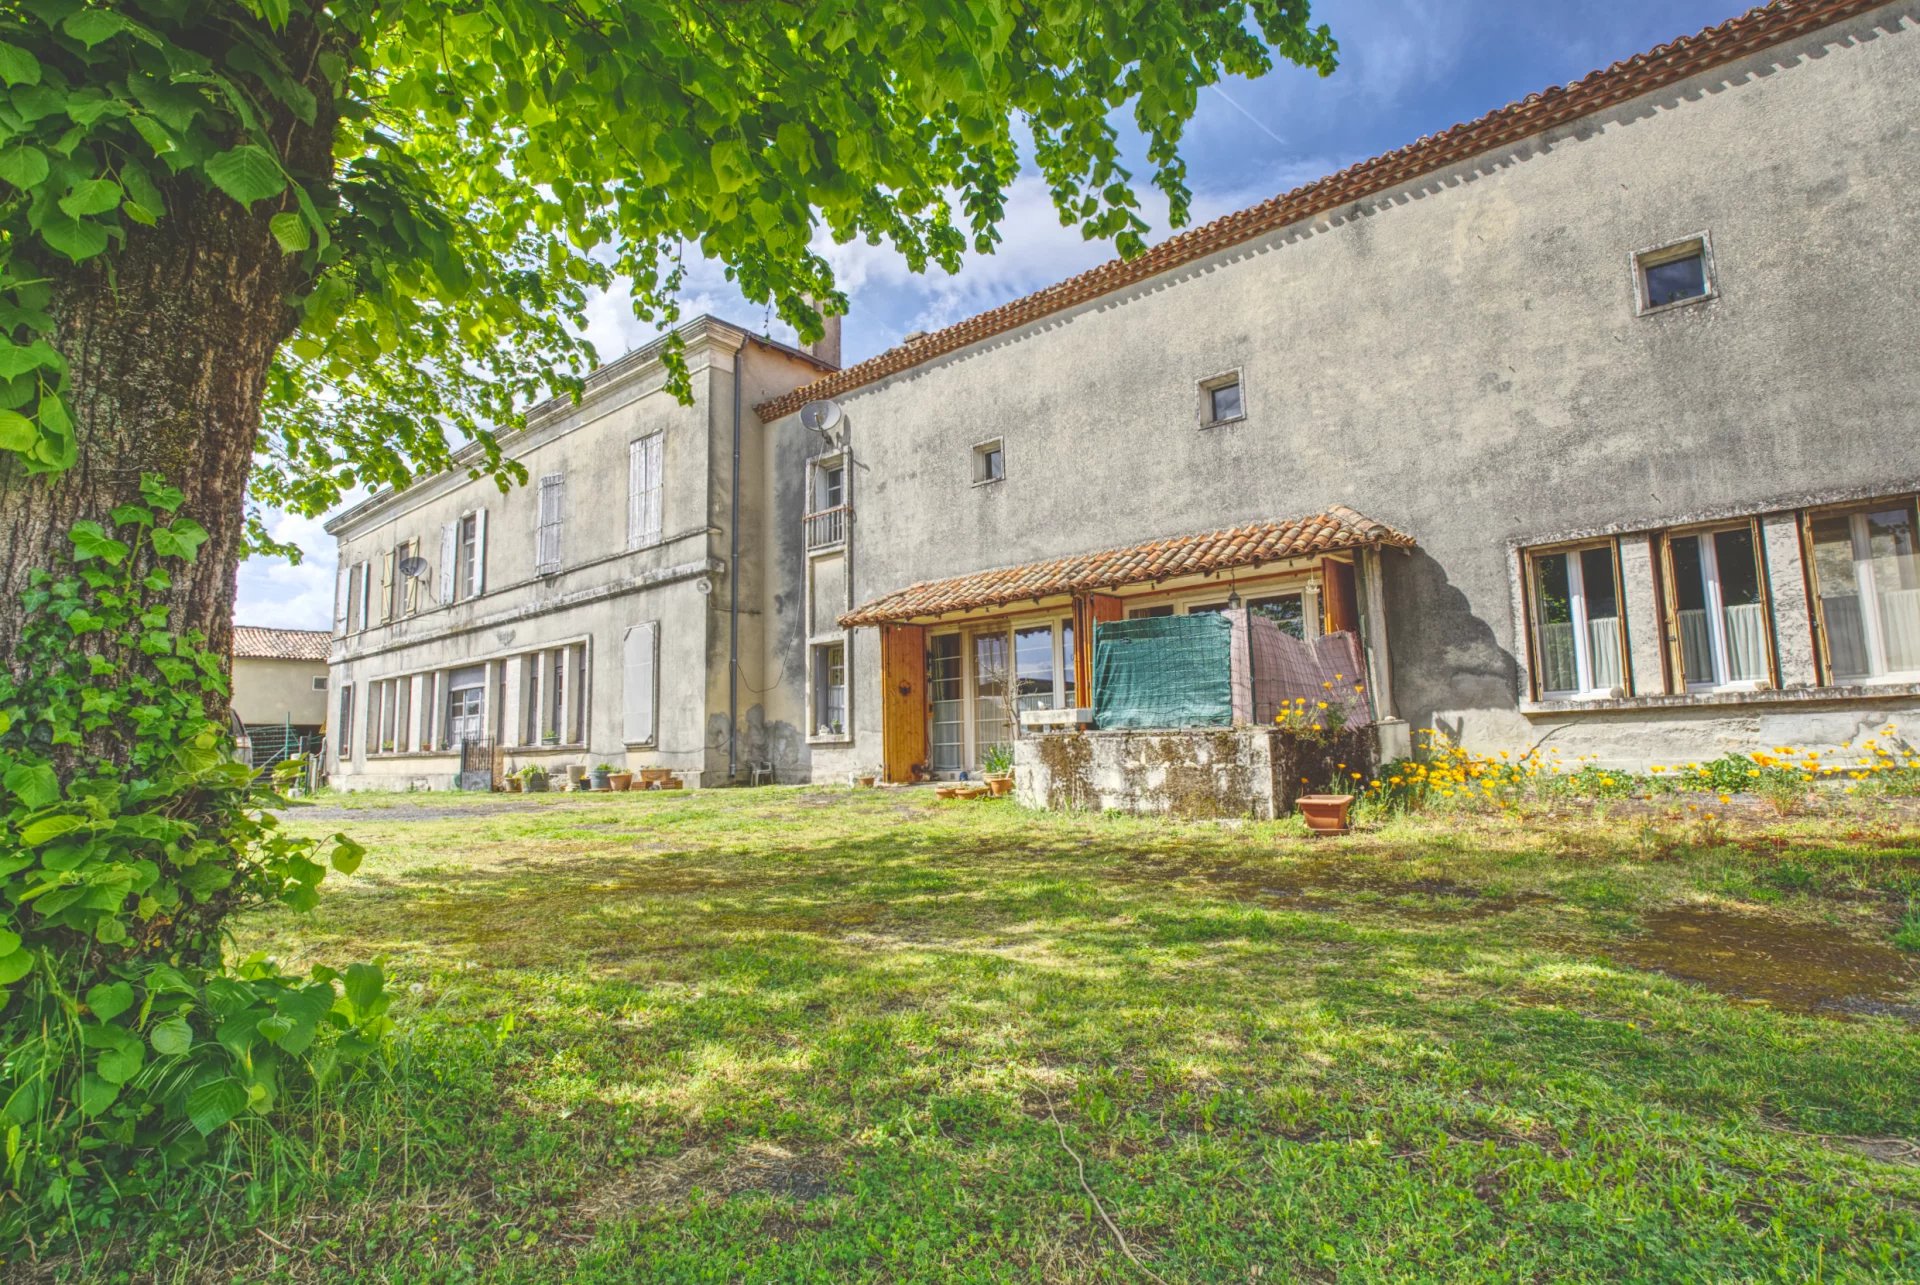 Former schoolhouse with 2 apartments, 1.5 km from town with amenities